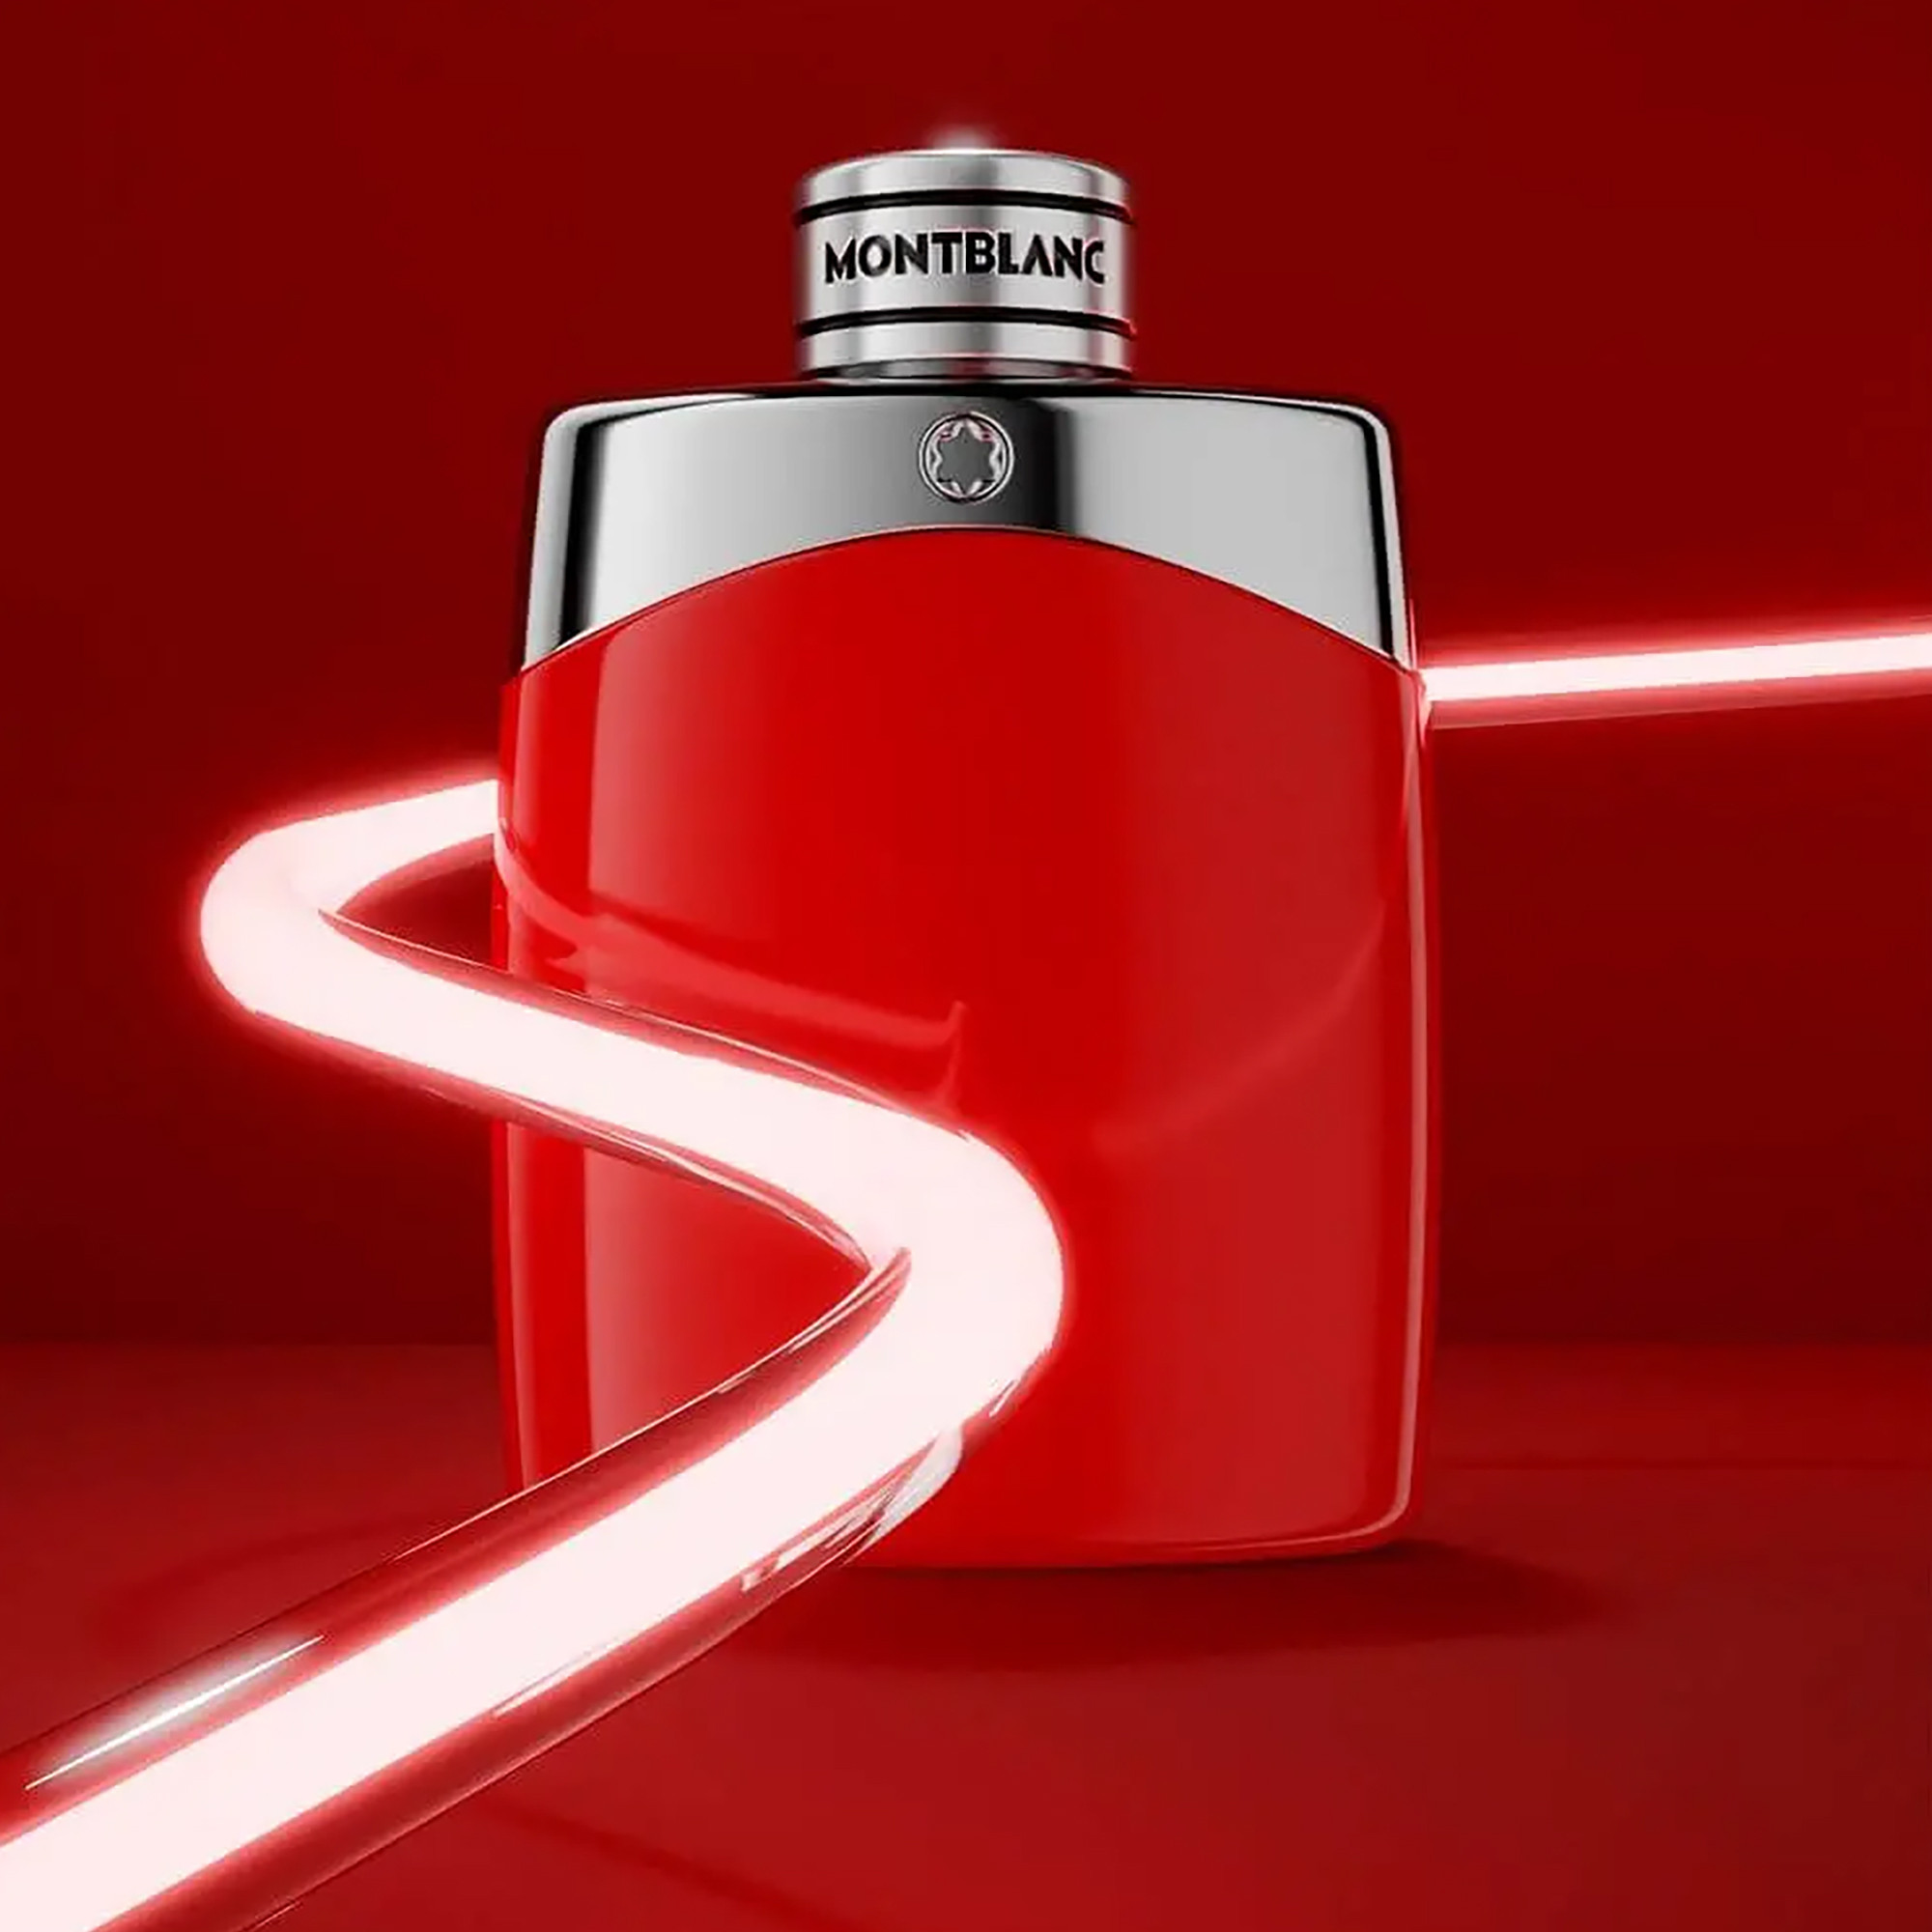 Legend Red EDP - Ngọn lửa của Montblanc.